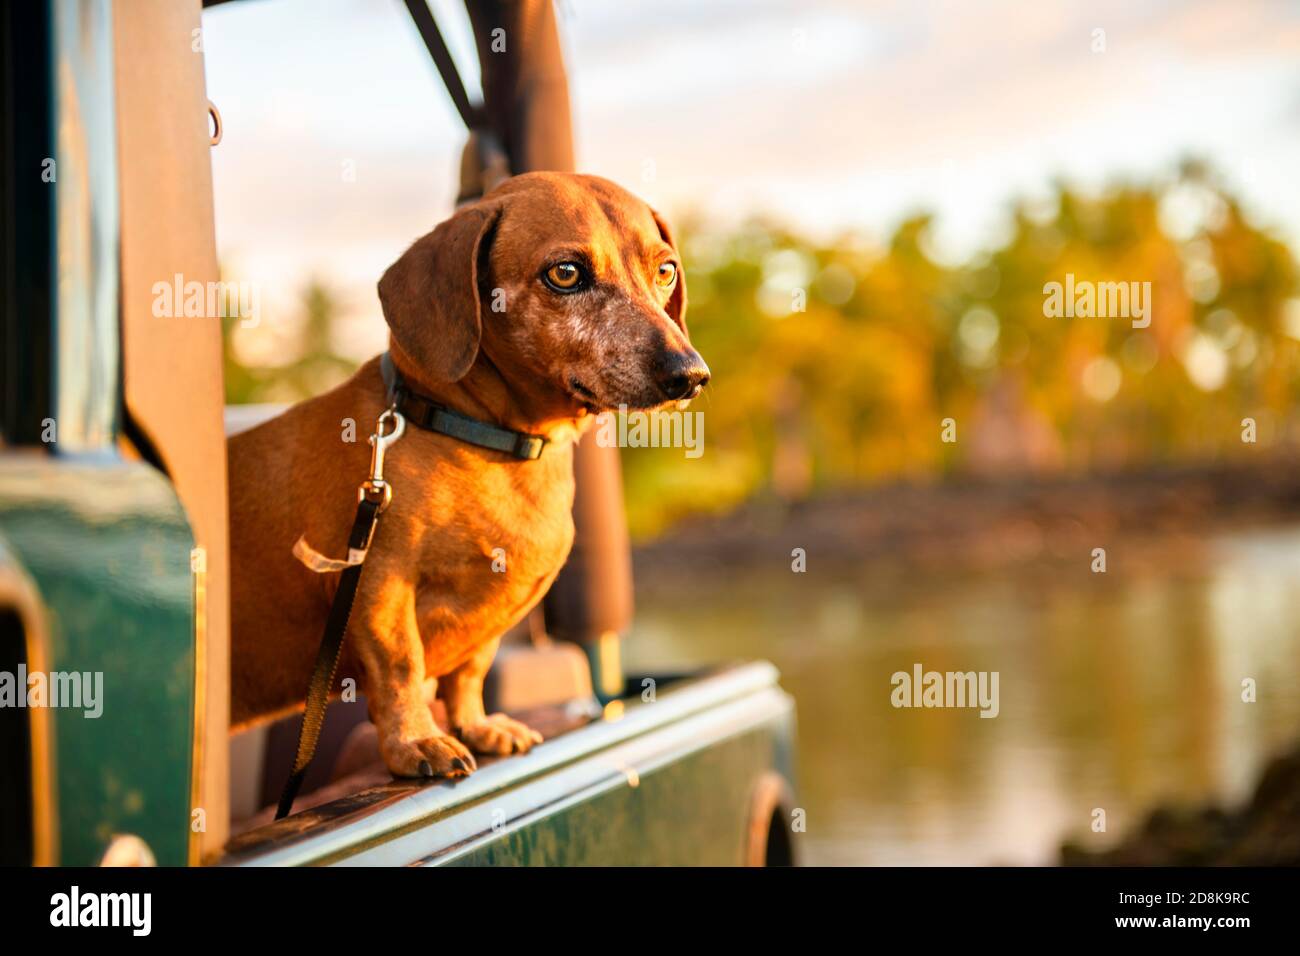 A portrait dog breed dachshund, tanning against the setting sun on the beach in summer Stock Photo